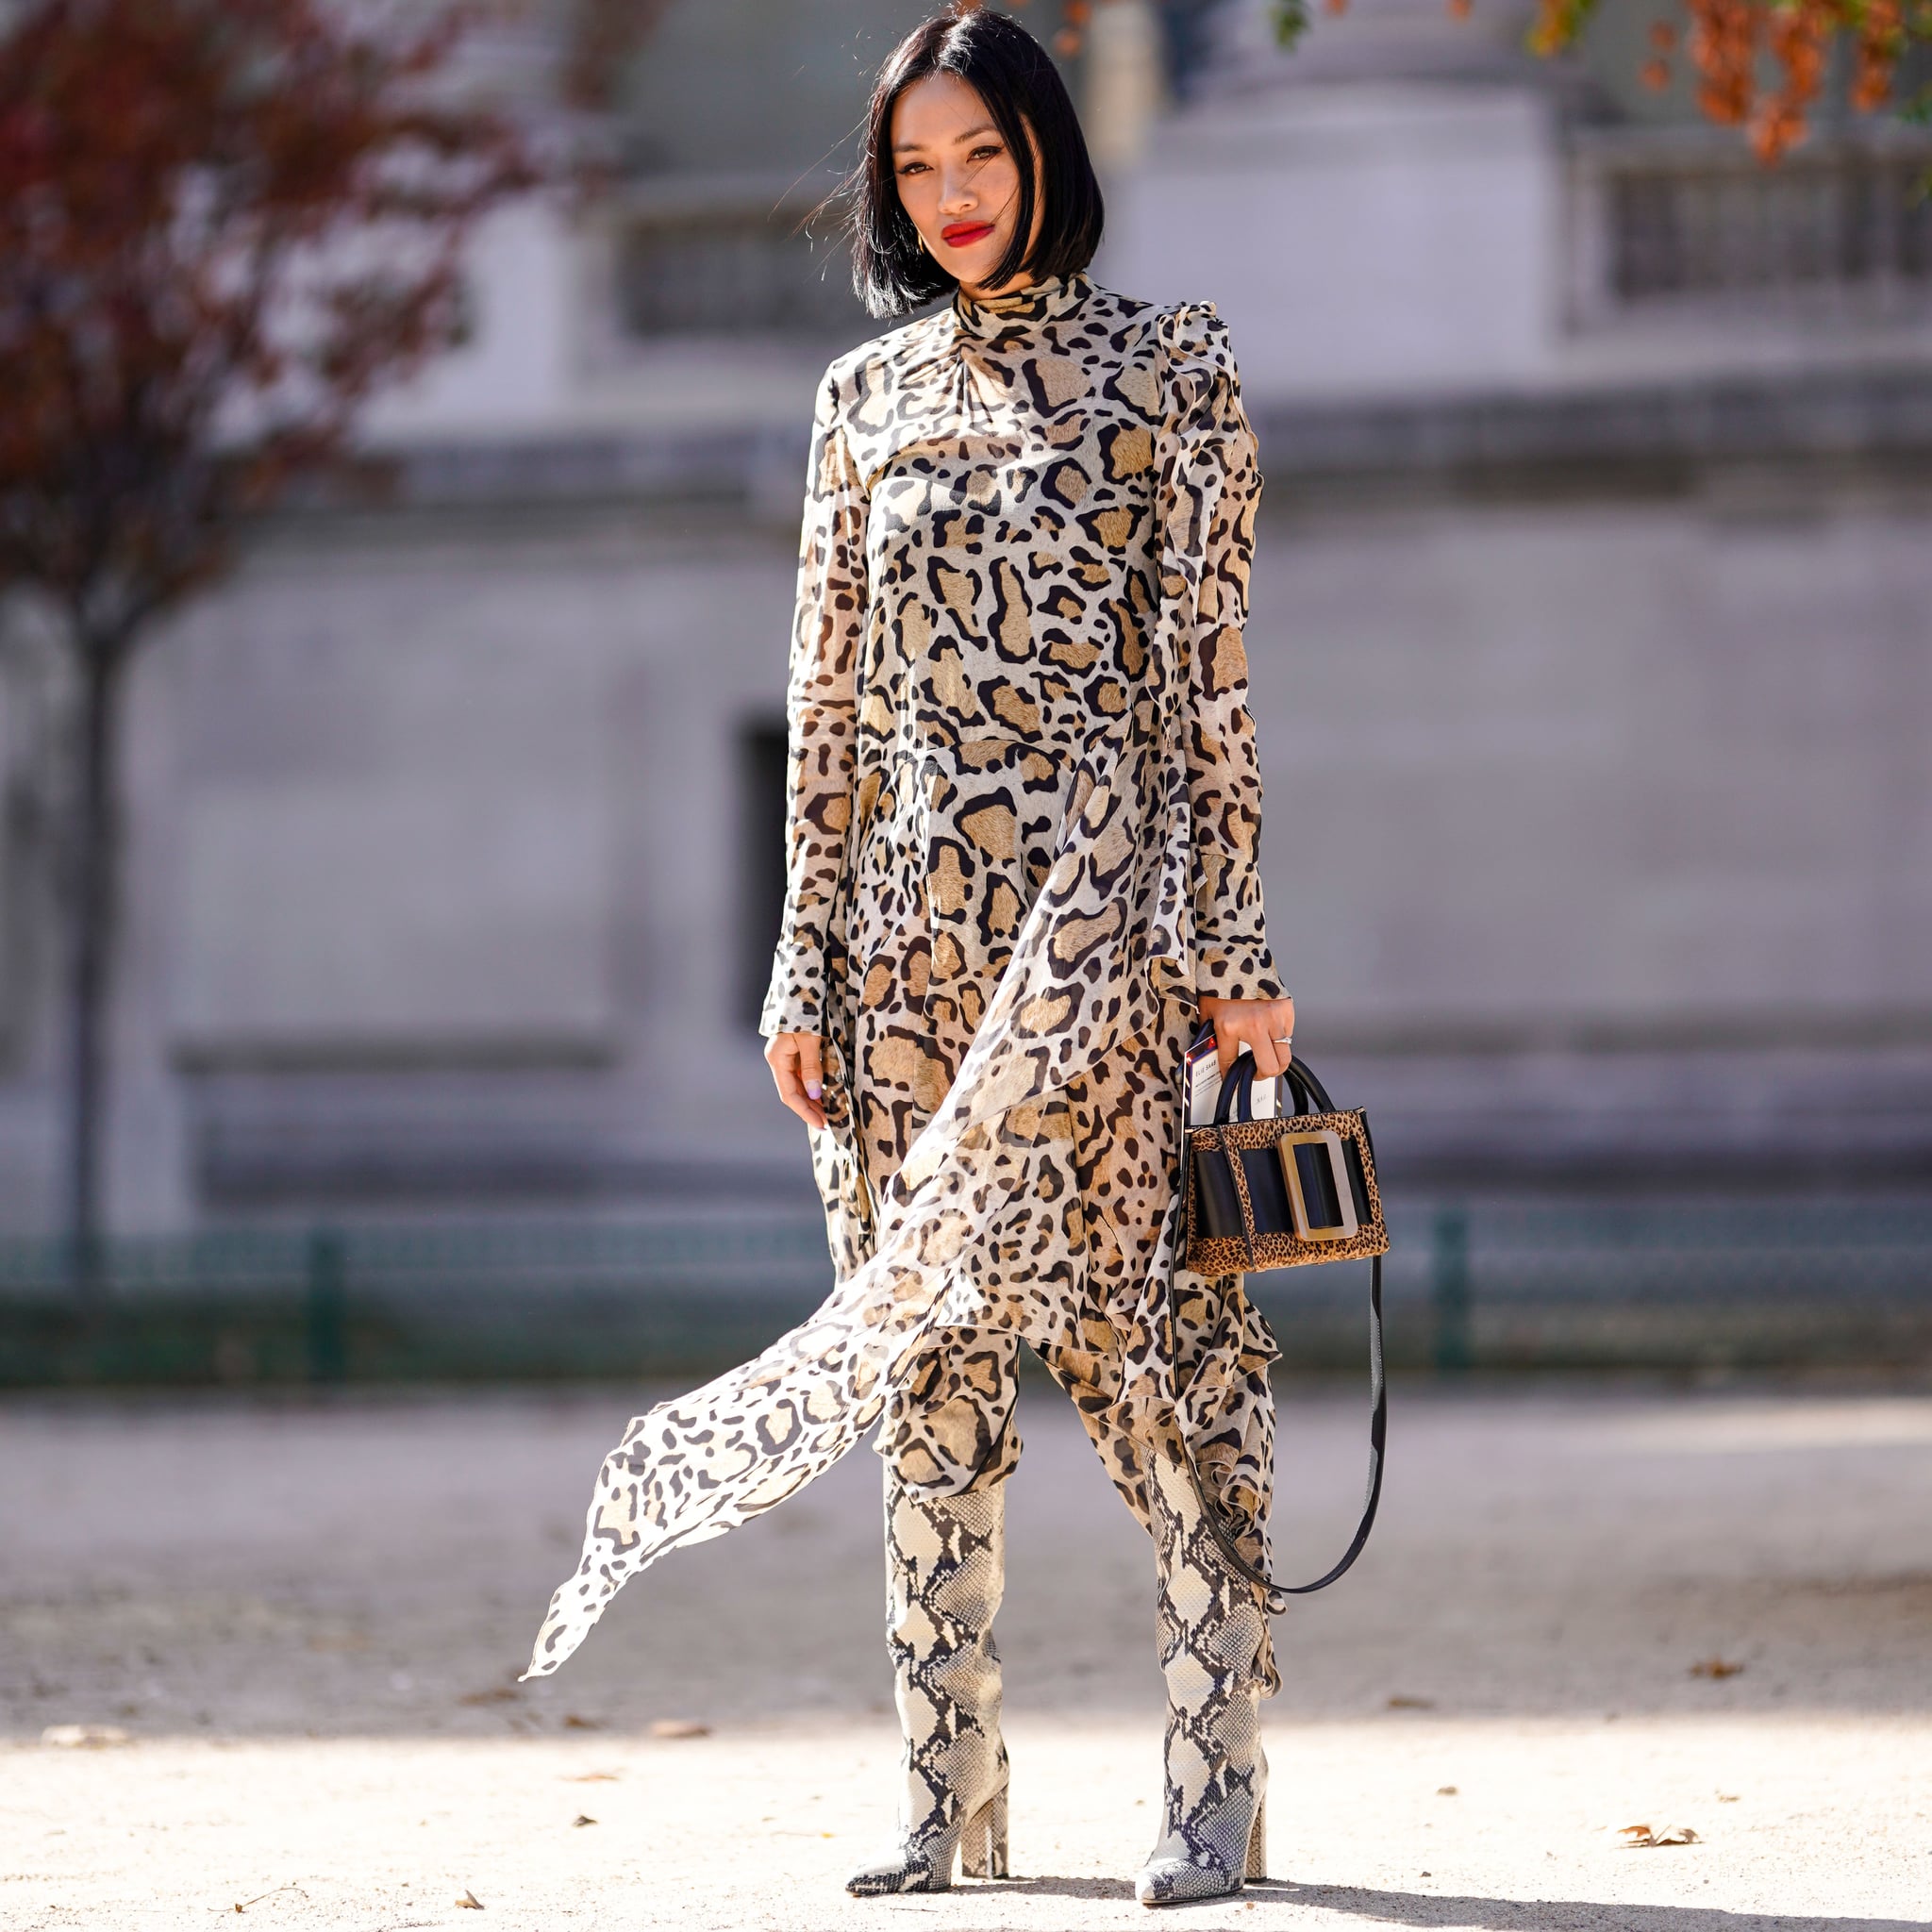 How to wear animal prints like a fashion editor - The Collective